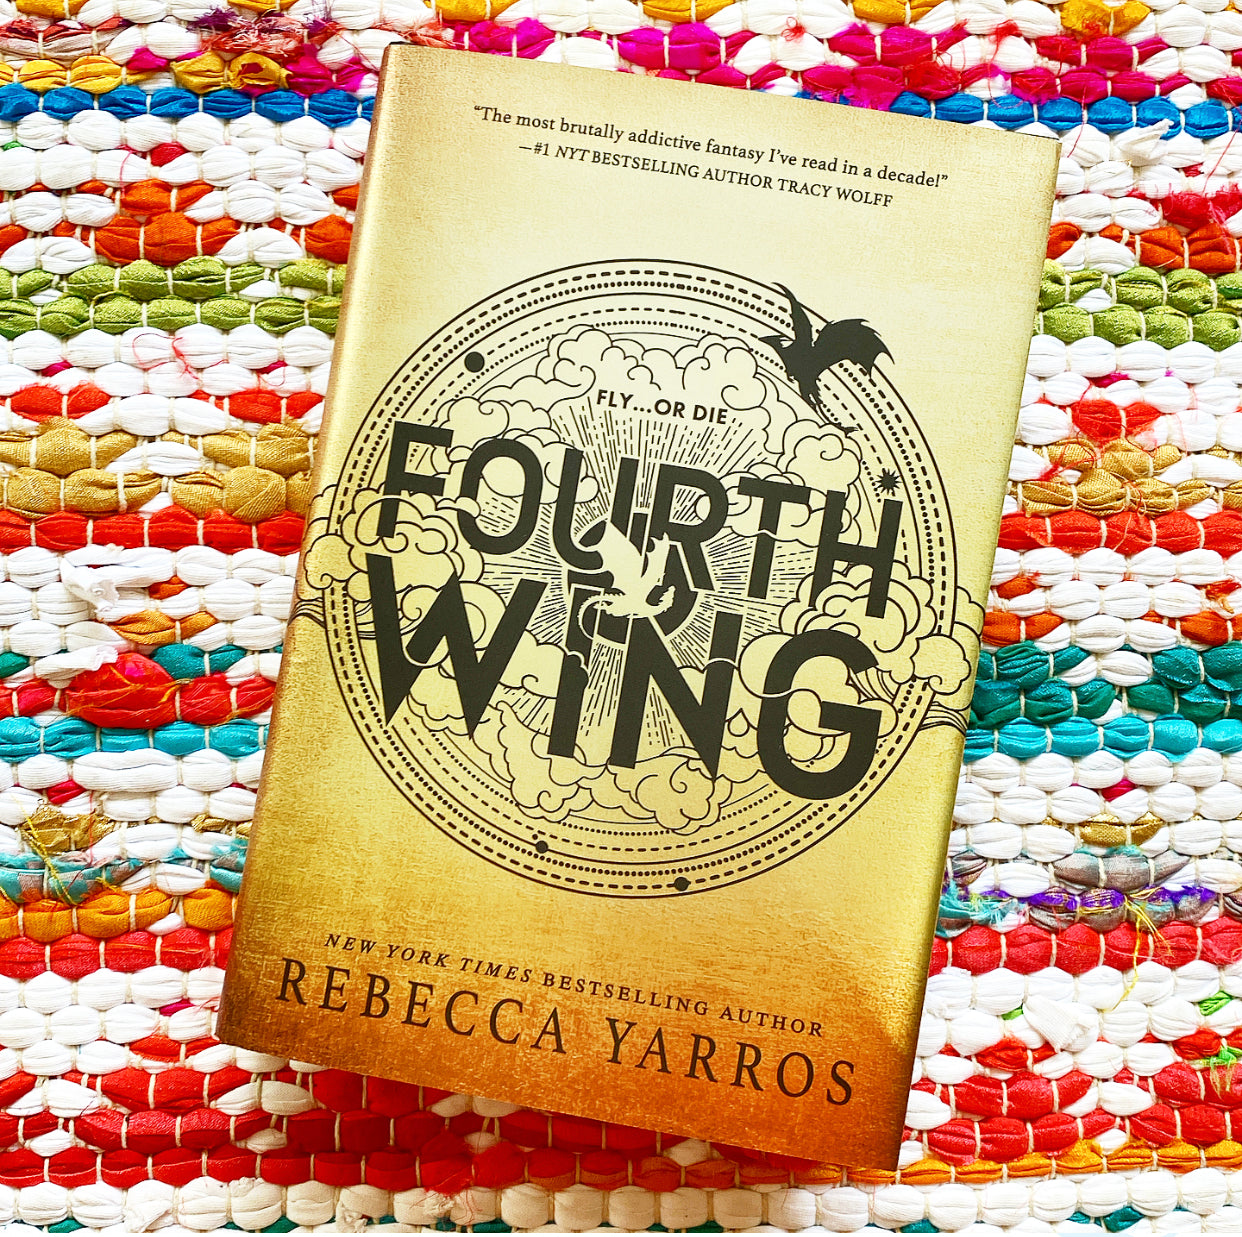 What happened in Fourth Wing by Rebecca Yarros - Plot Summary